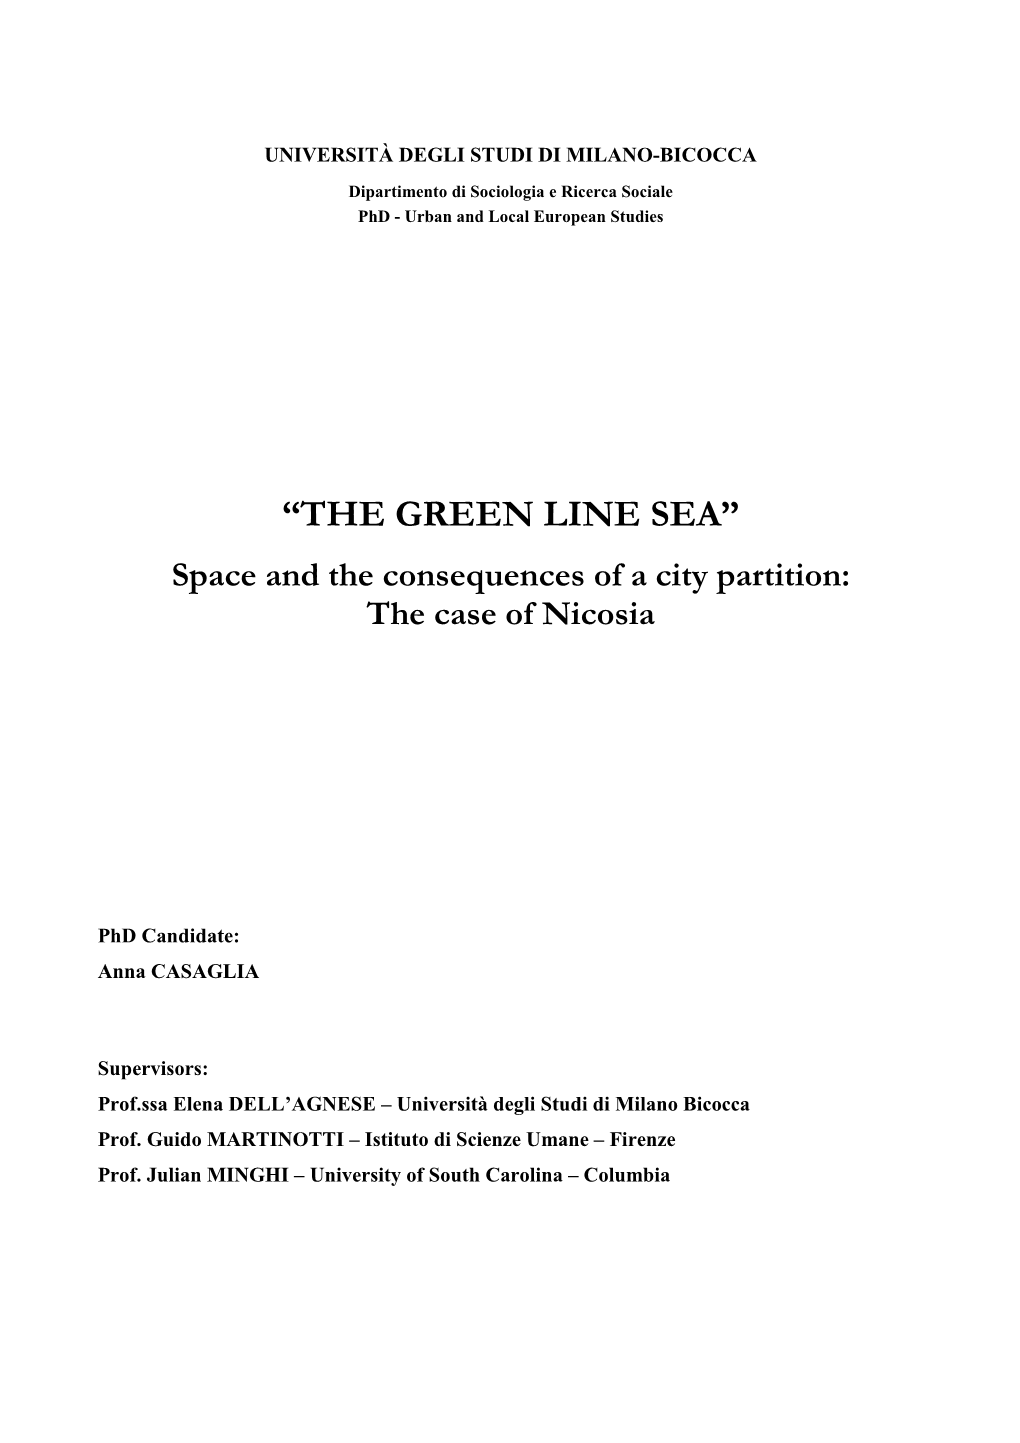 THE GREEN LINE SEA” Space and the Consequences of a City Partition: the Case of Nicosia